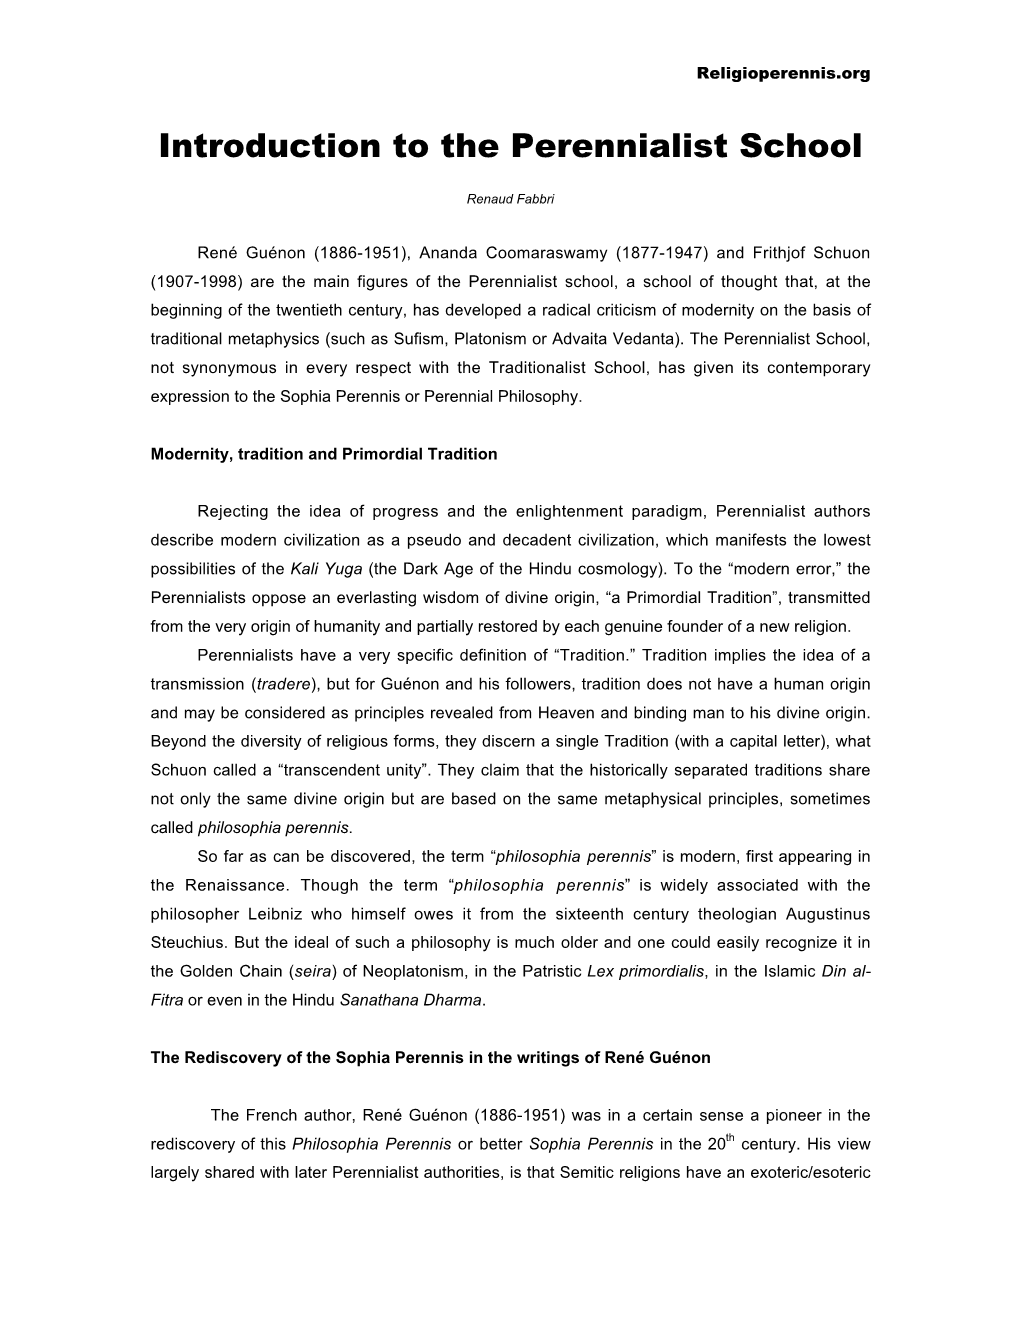 Introduction to the Perennialist School